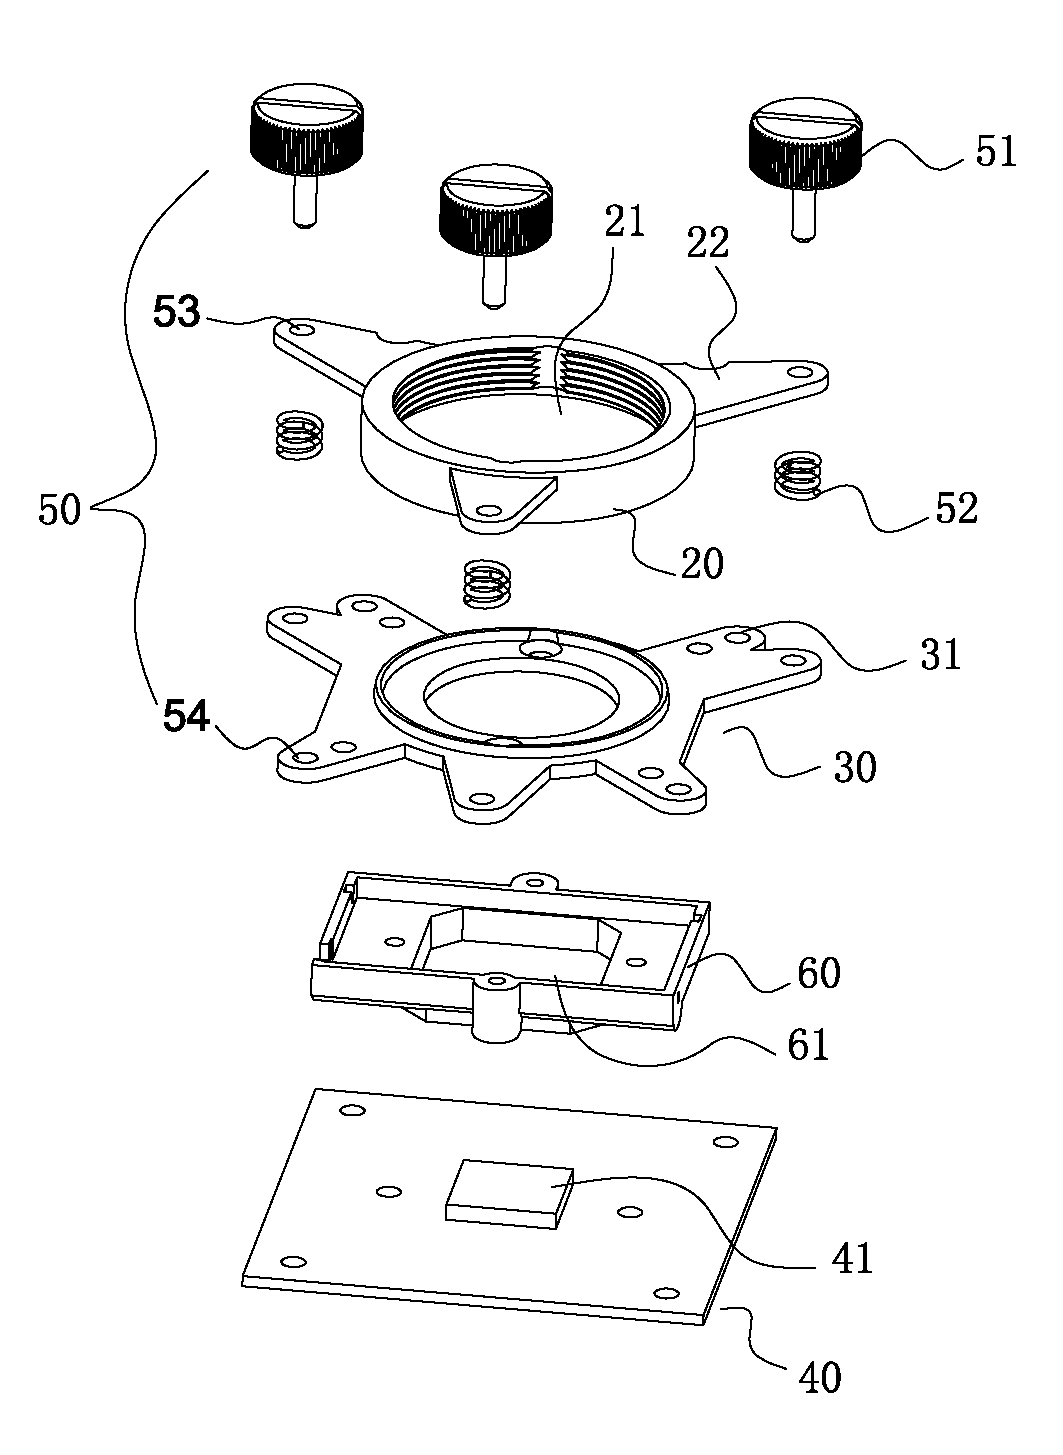 Adjusting device for verticality and separation distance between shot and imaging chip